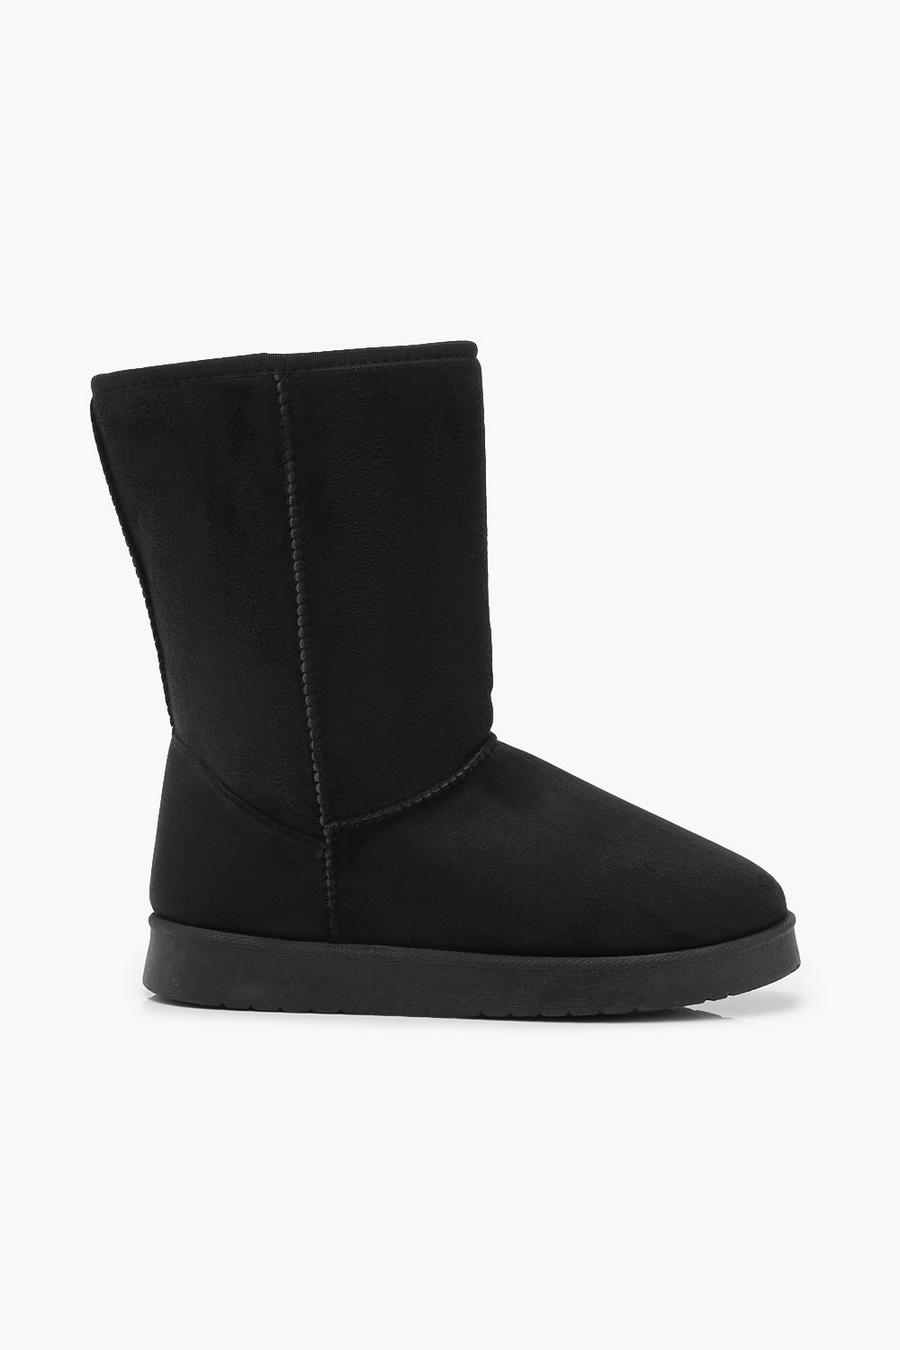 Black Faux Fur Lined Cozy Boots image number 1